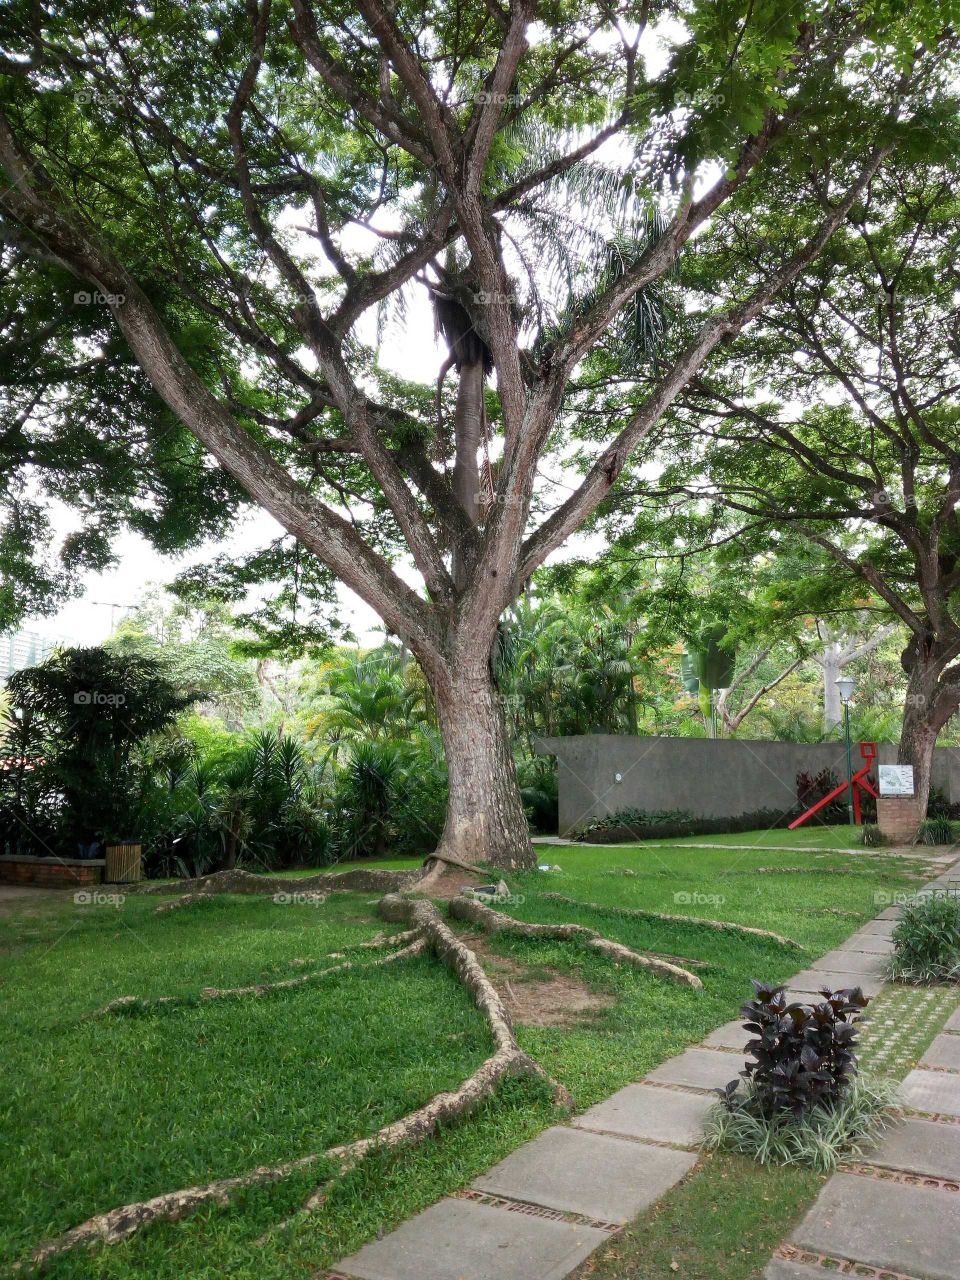 As is up, is down! Beautiful tree and perfect balance between green and brown. Hacienda La Trinidad - Caracas. All the year seems like if time had stop ed. Always giving shadow and freshness.